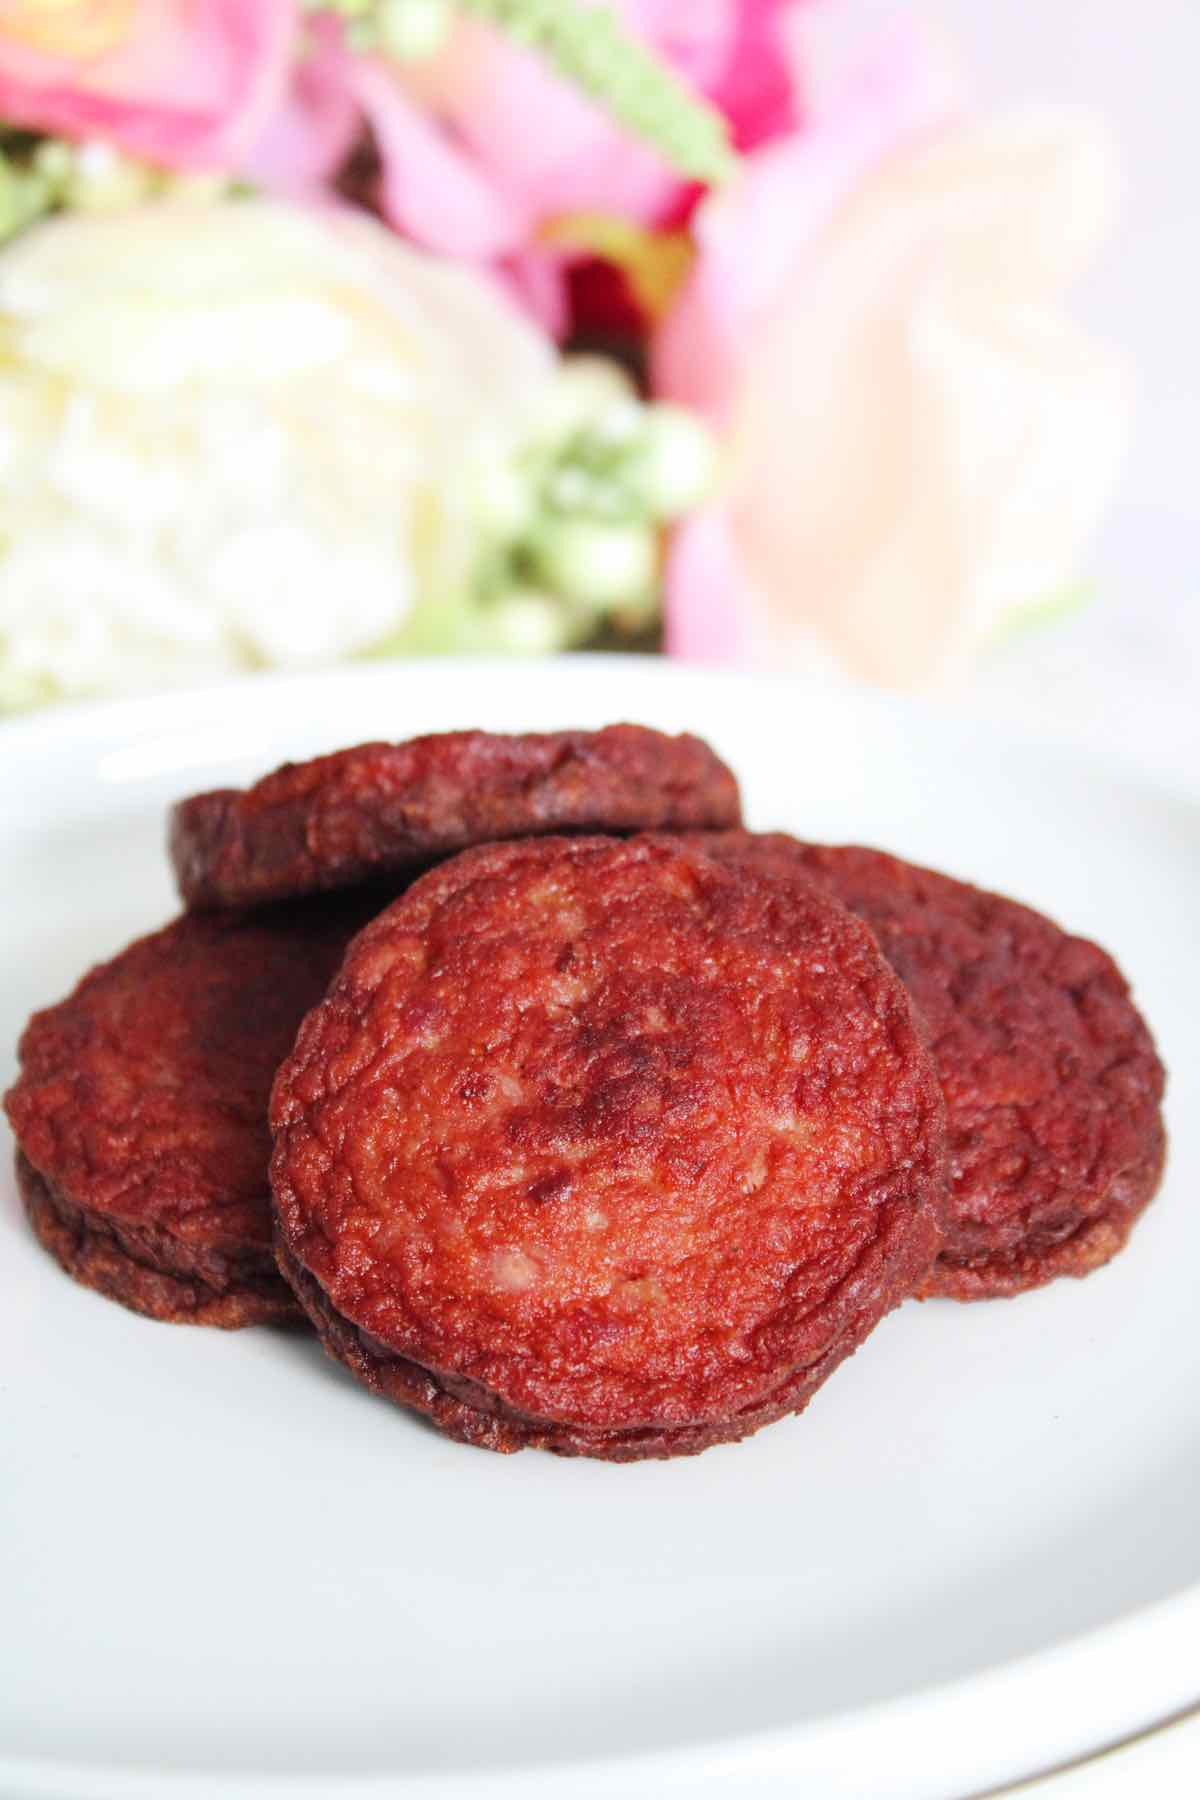 Dominican fried salami